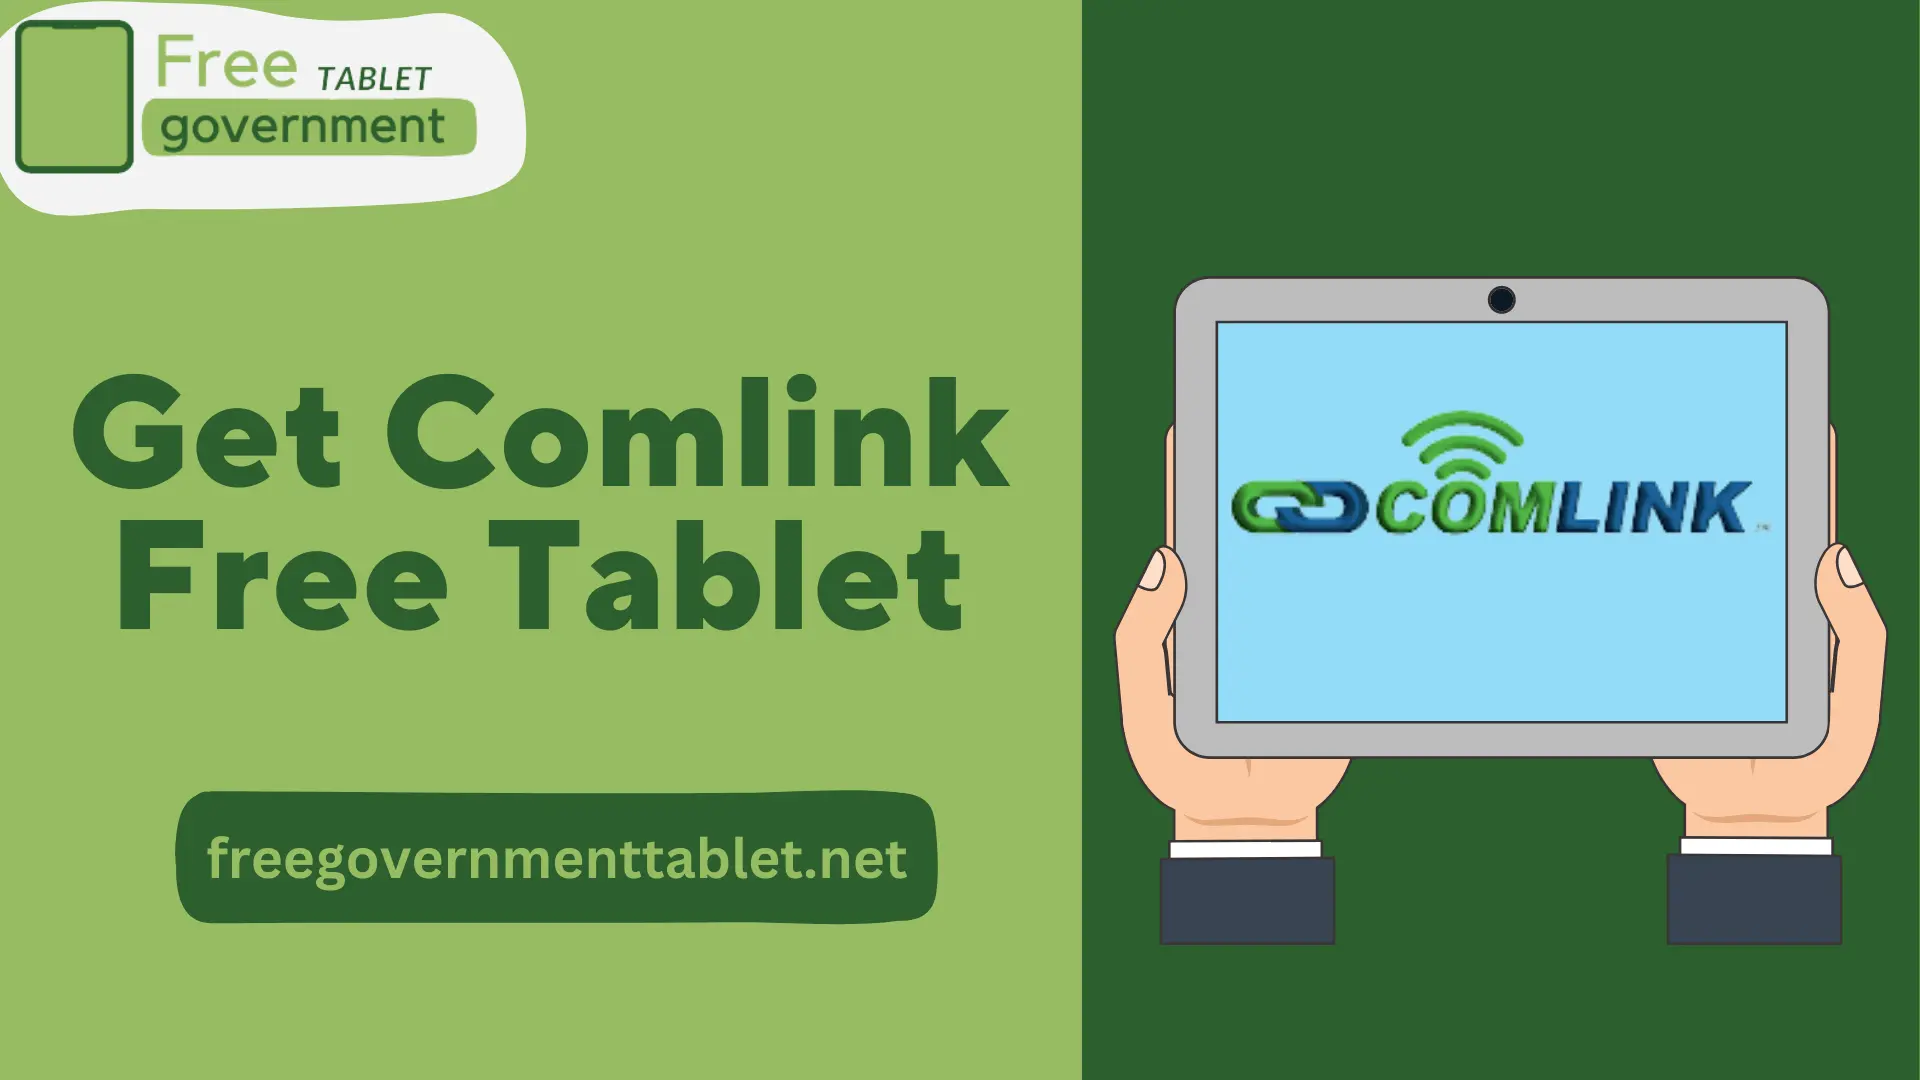 How to Get Comlink Free Tablet